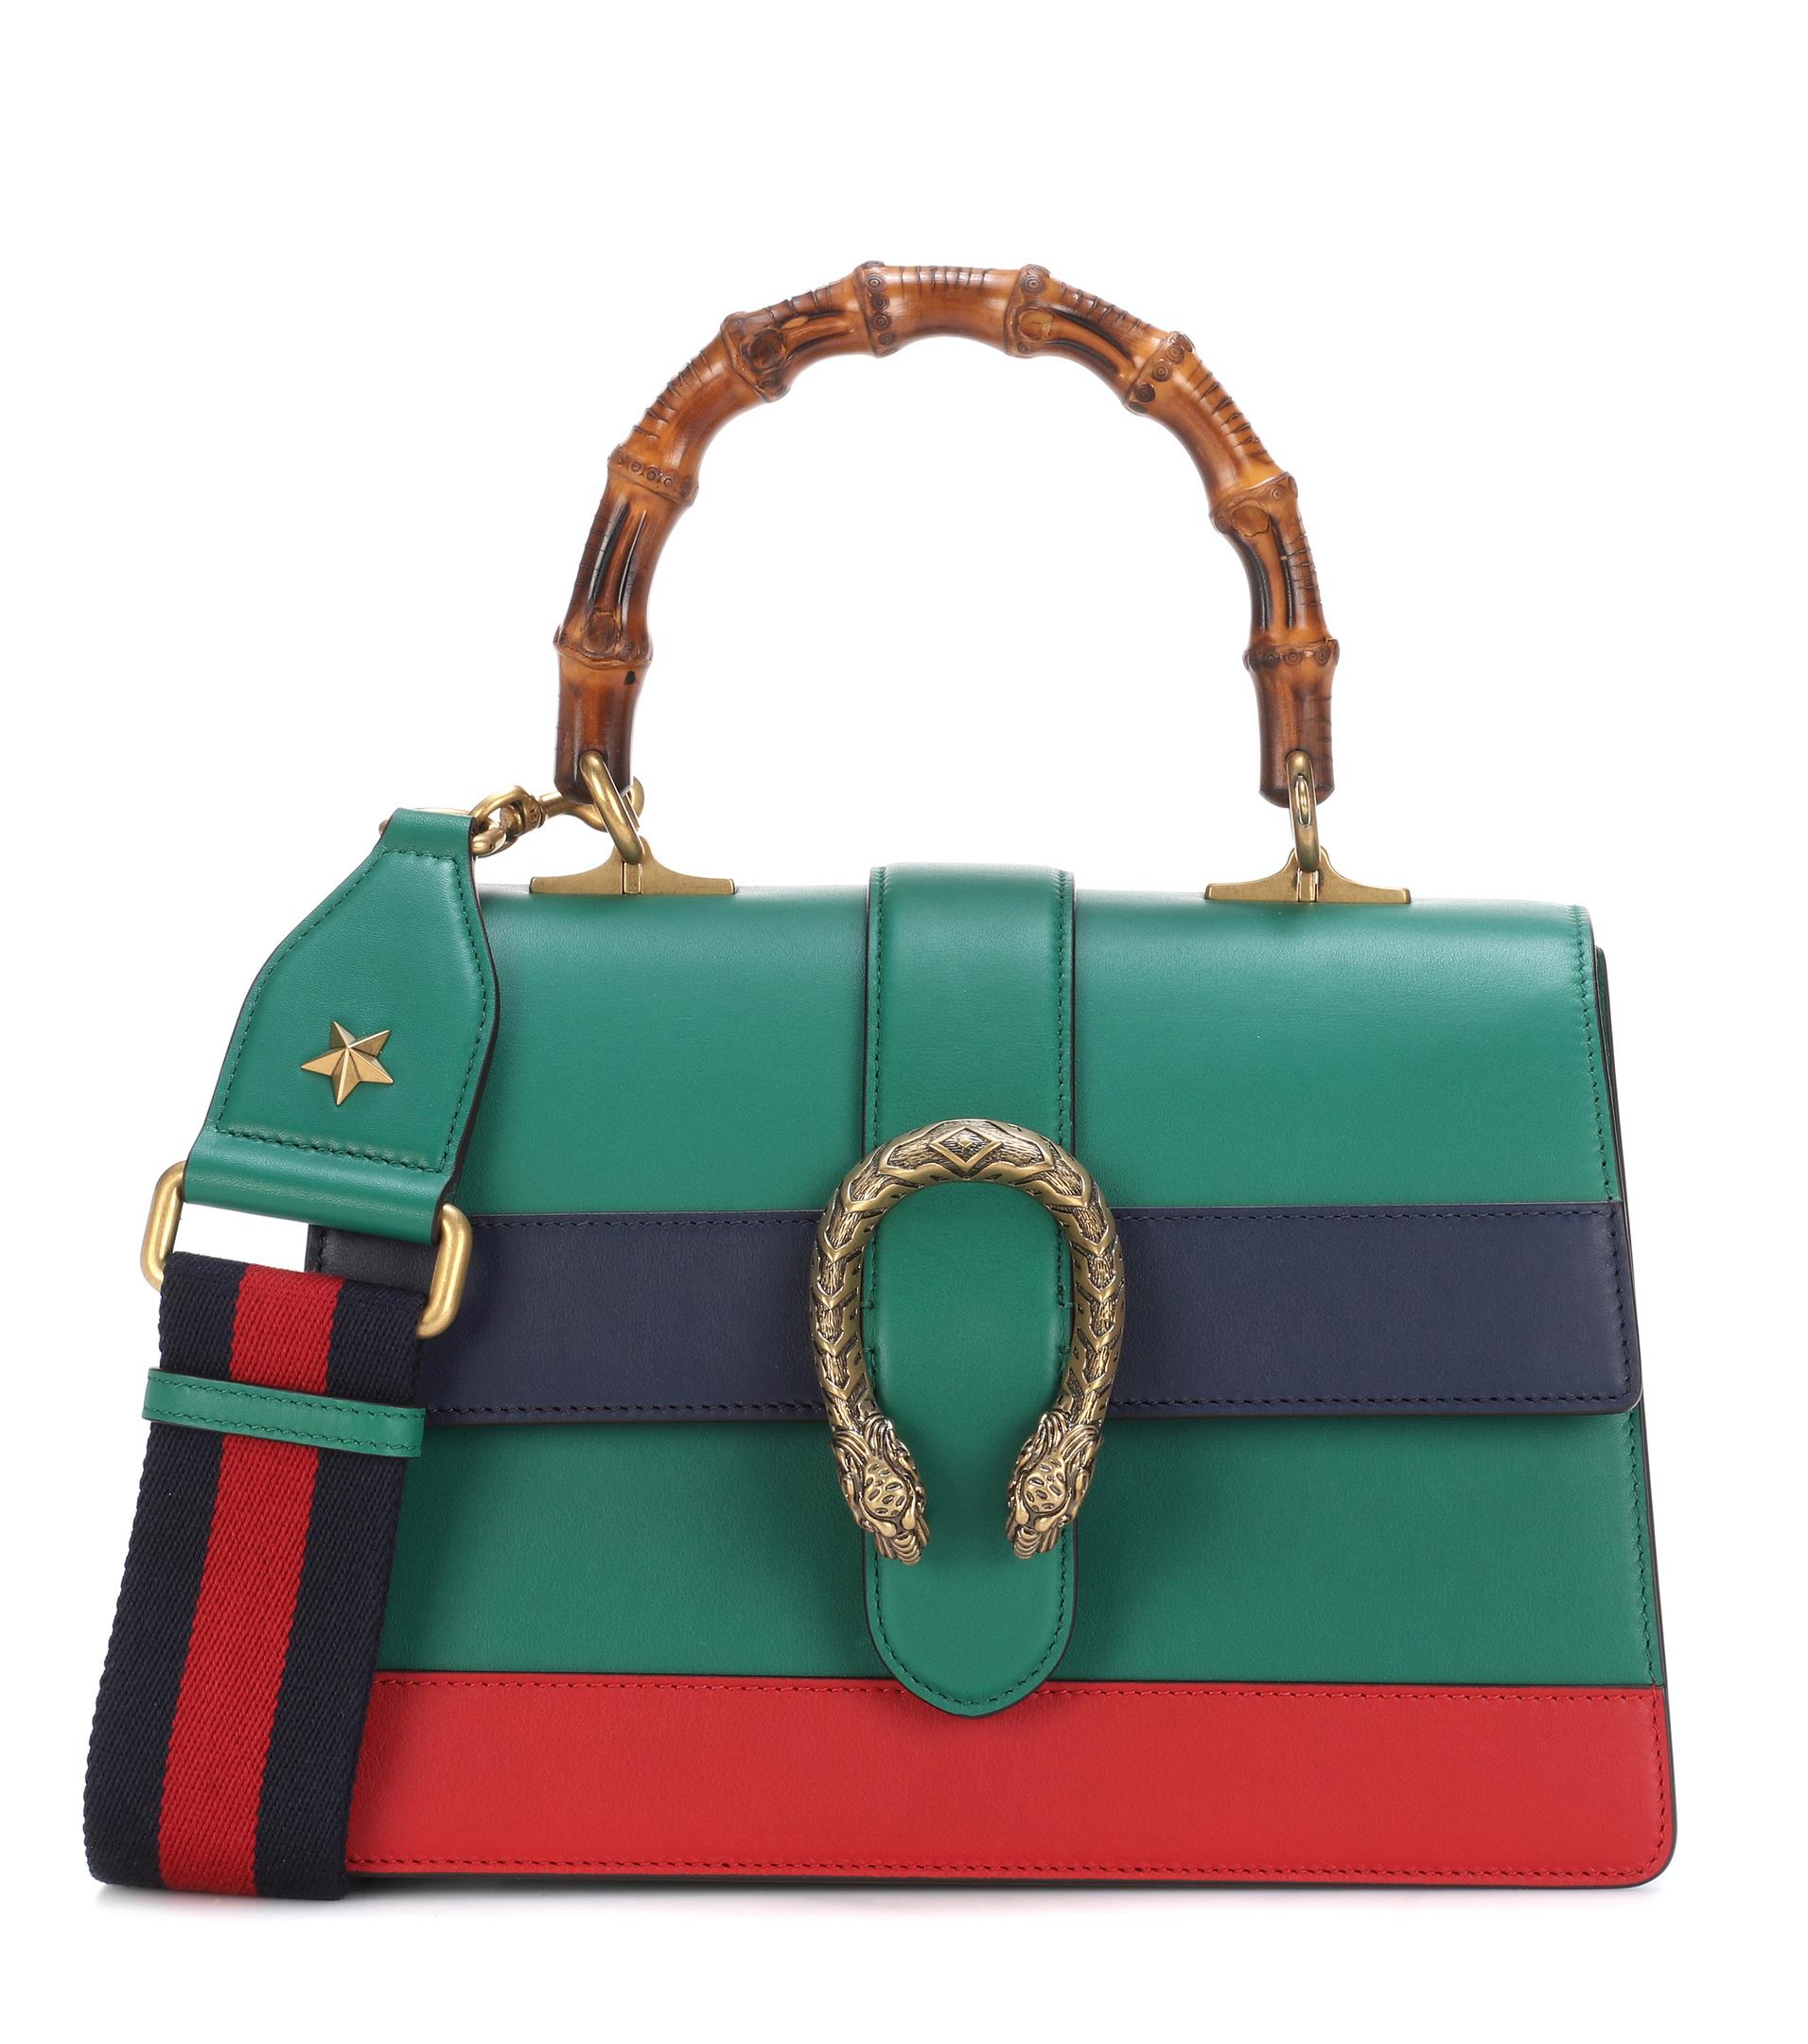 Gucci Dionysus Bamboo Medium Leather Shoulder Bag in Green - Lyst